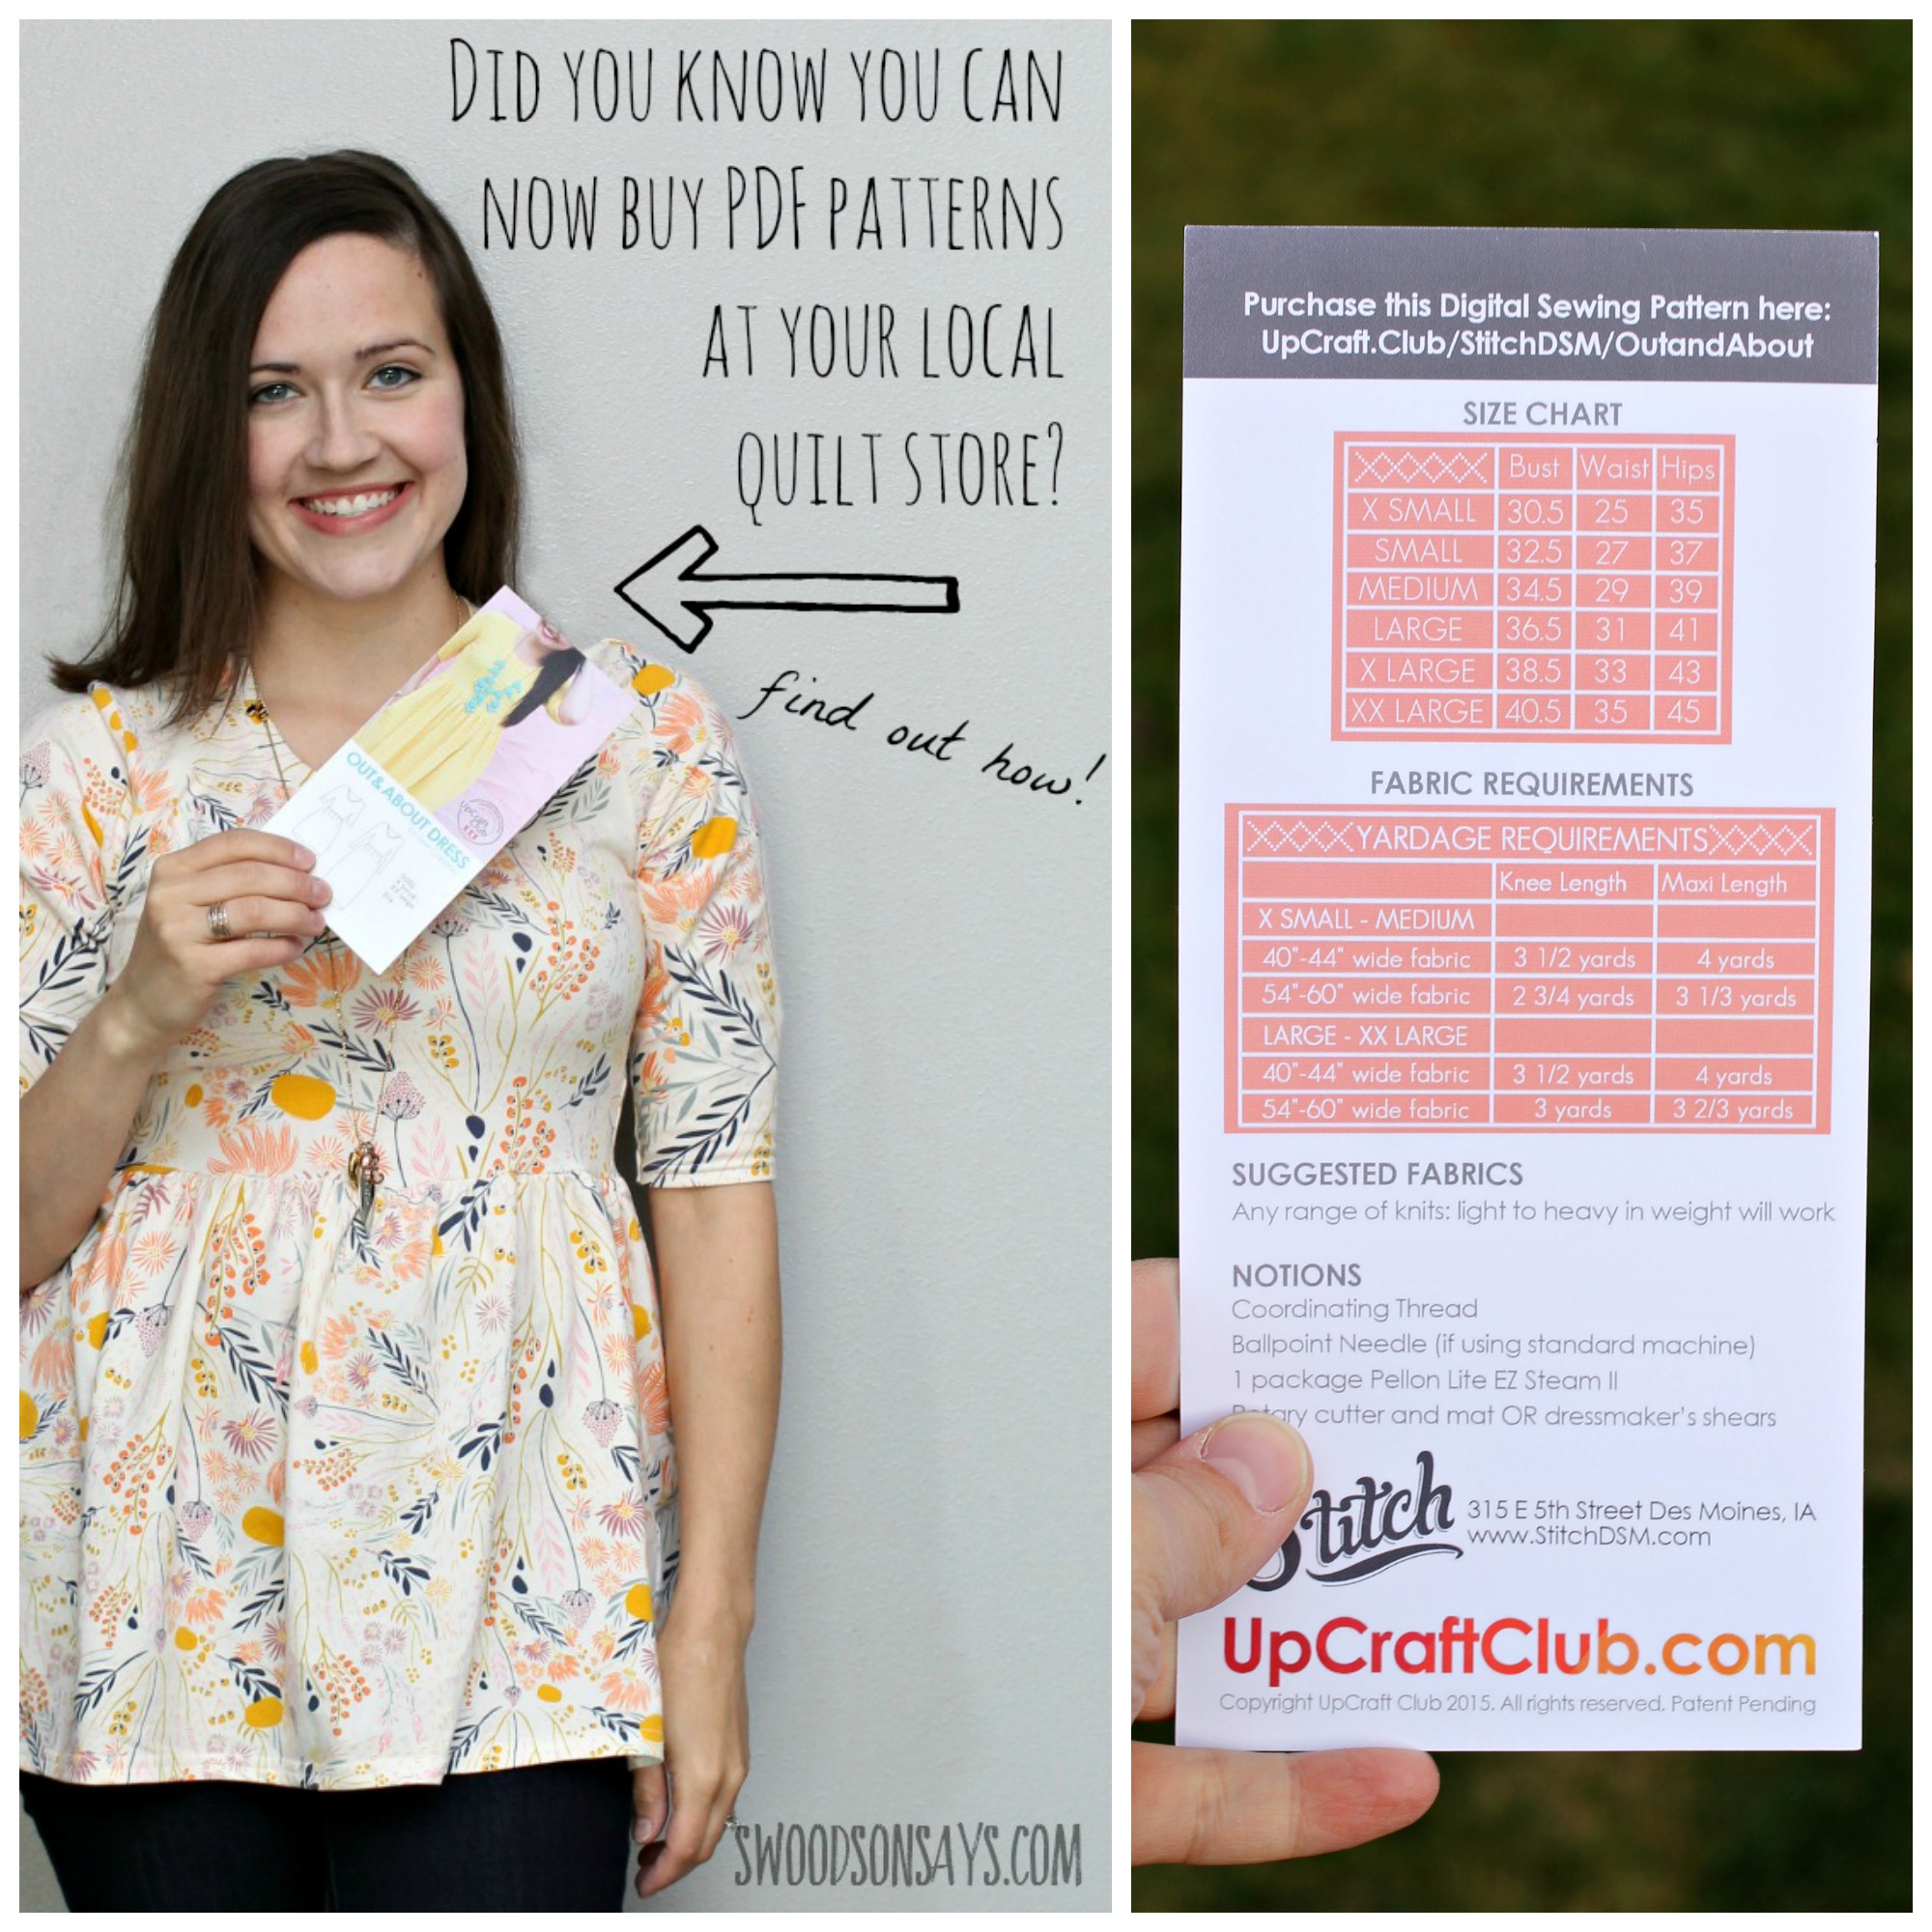 You can buy PDF patterns at your local quilt shop now, thanks to UpCraft Club! It is so easy, I show you how in this post (and share my cute Sew Caroline Out and About "Dress"). Sponsored post on Swoodsonsays.com